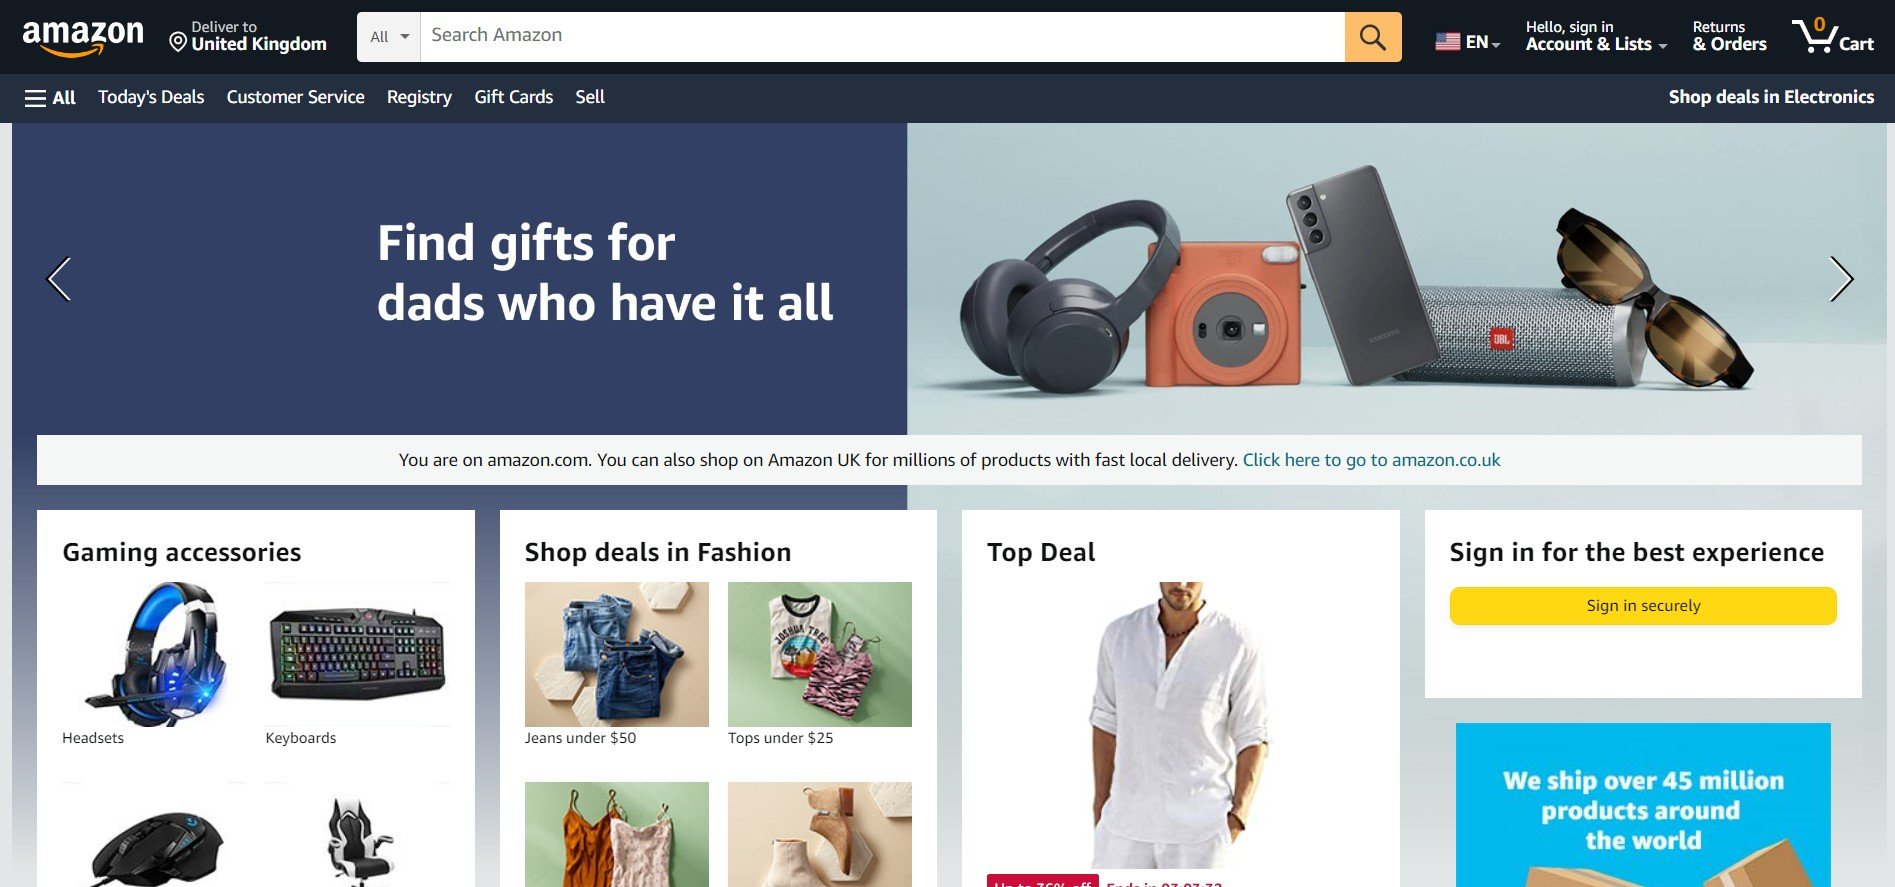 Top eCommerce sites in the world: Amazon